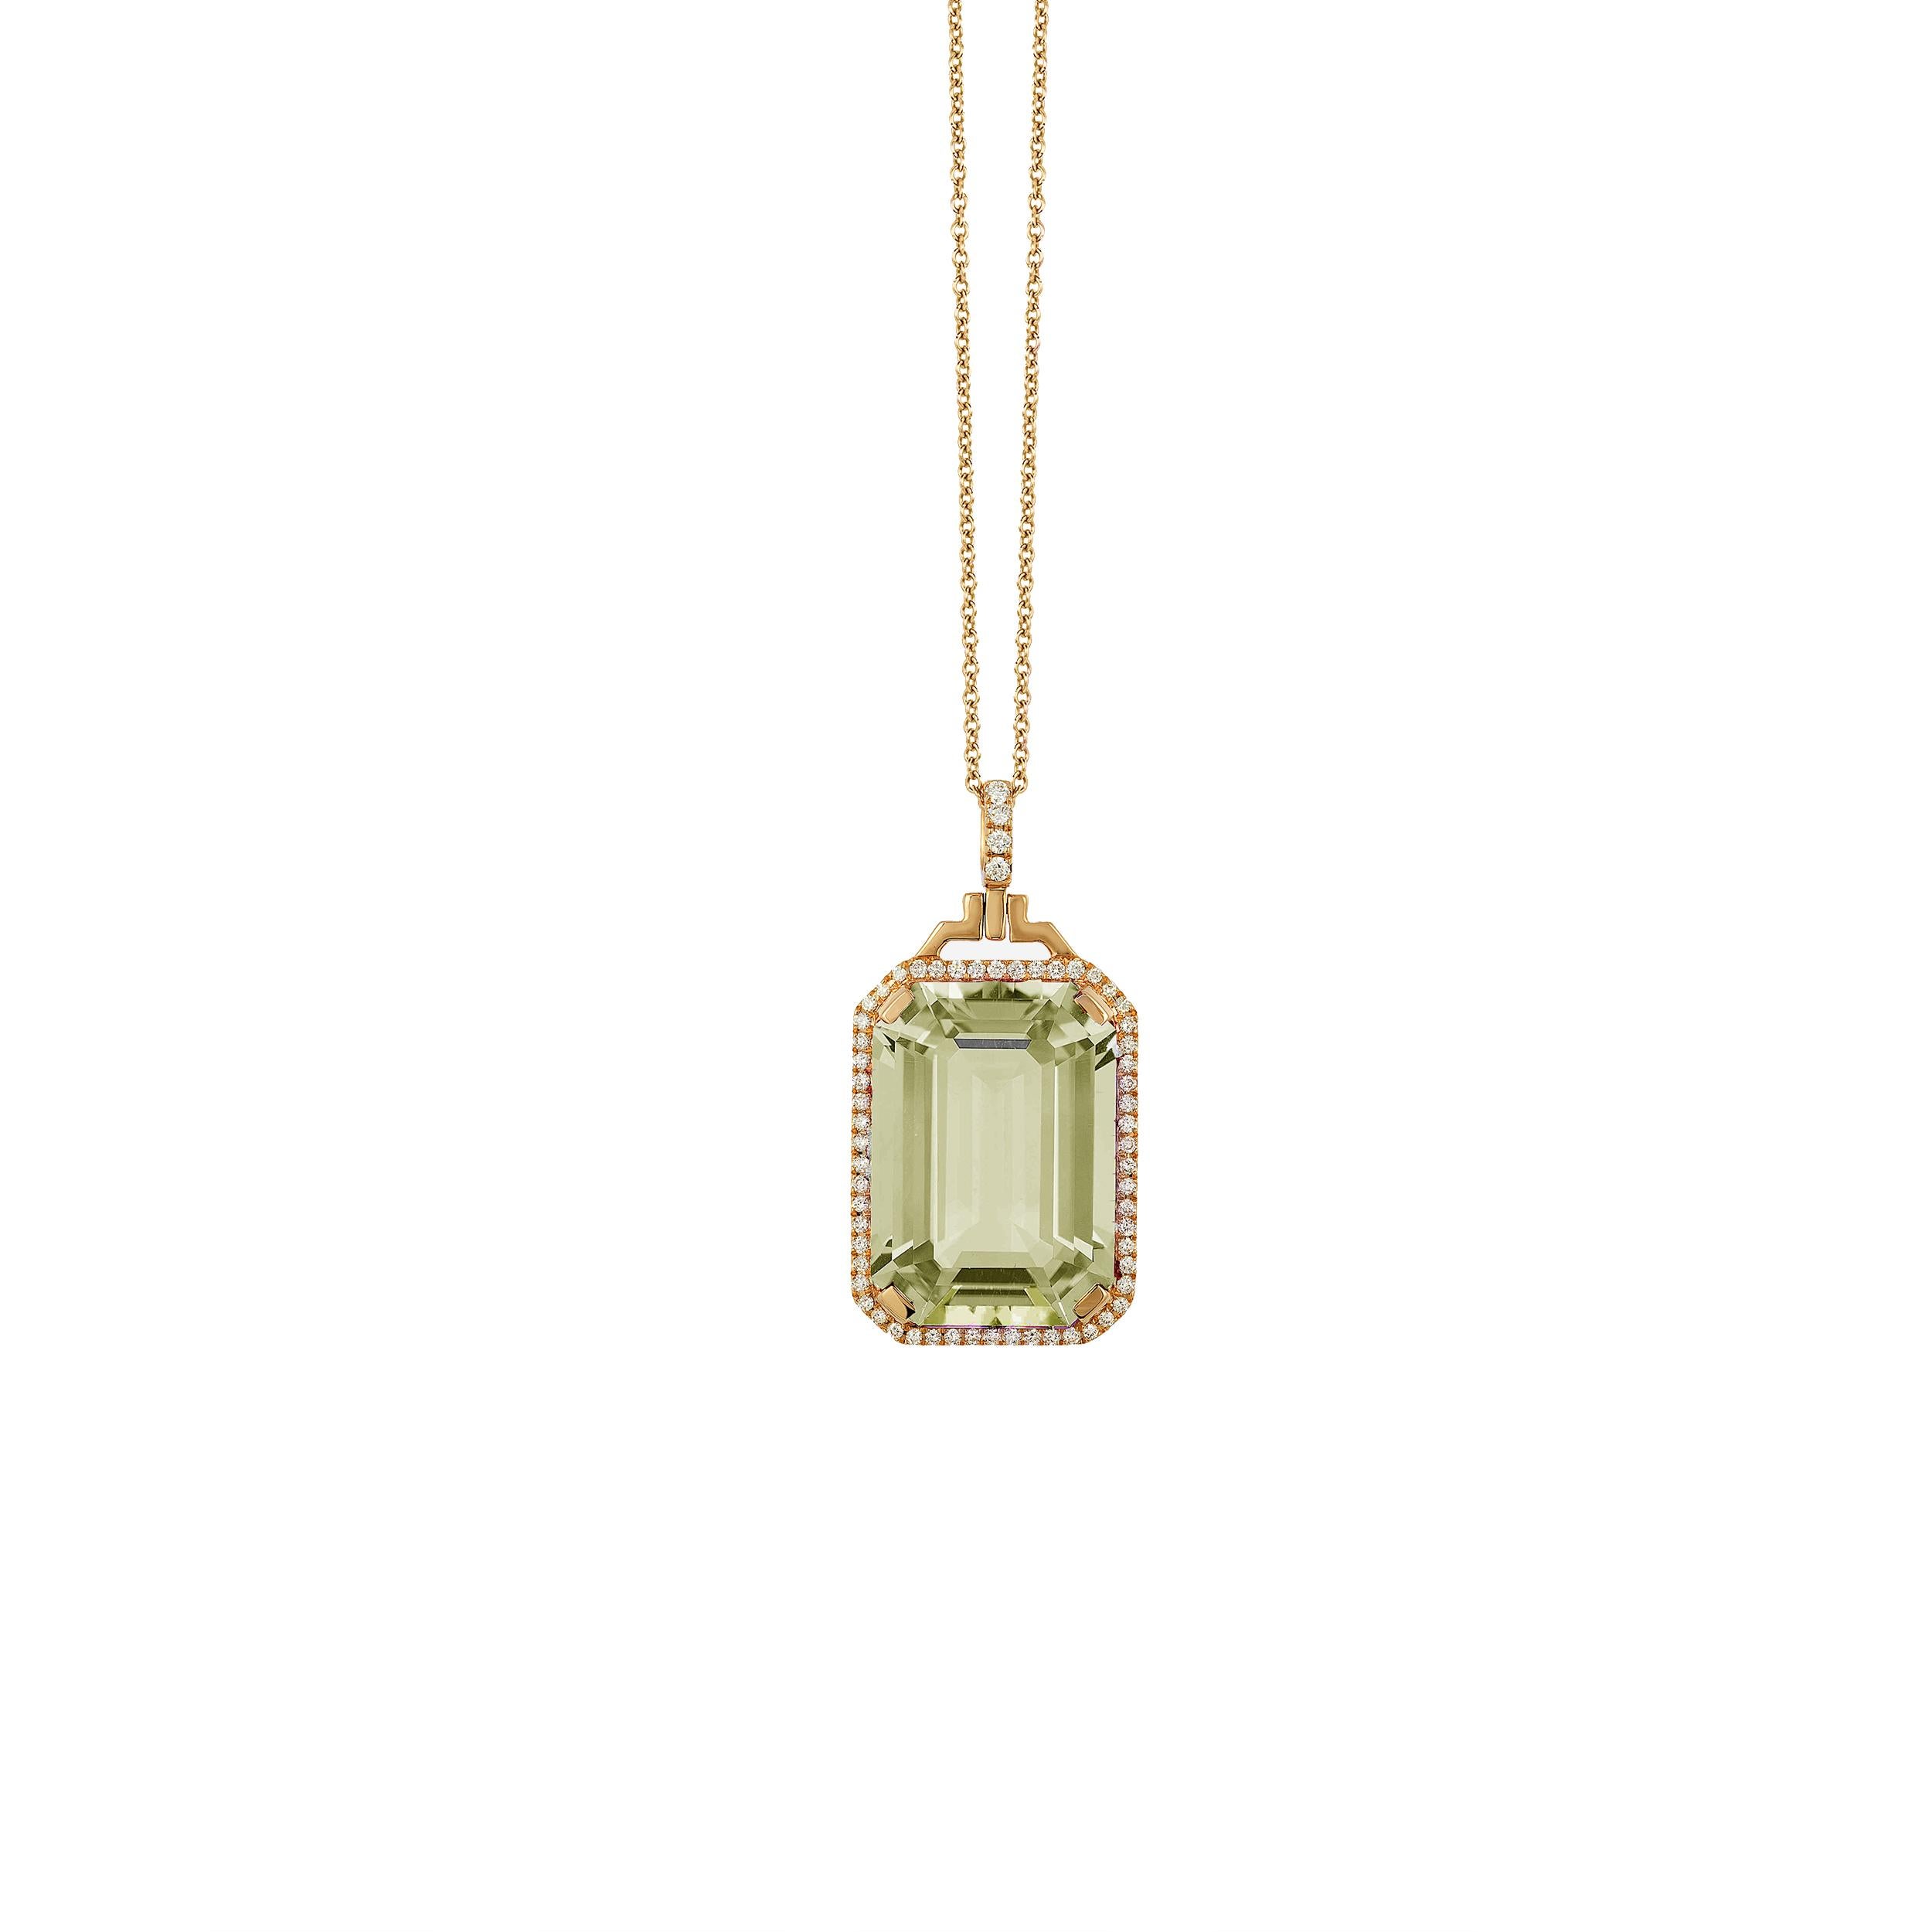 Prasiolite Emerald Cut Pendant with Diamonds in 18K Pink Gold, from 'Gossip' Collection 
 
 on a 18'' Chain
 
 Stone Size: 10 x 15 mm 
 
 Gemstone Approx Wt: Prasiolite- 6.95 Carats 
 
 Diamonds: G-H / VS, Approx Wt : 0.15 Carats